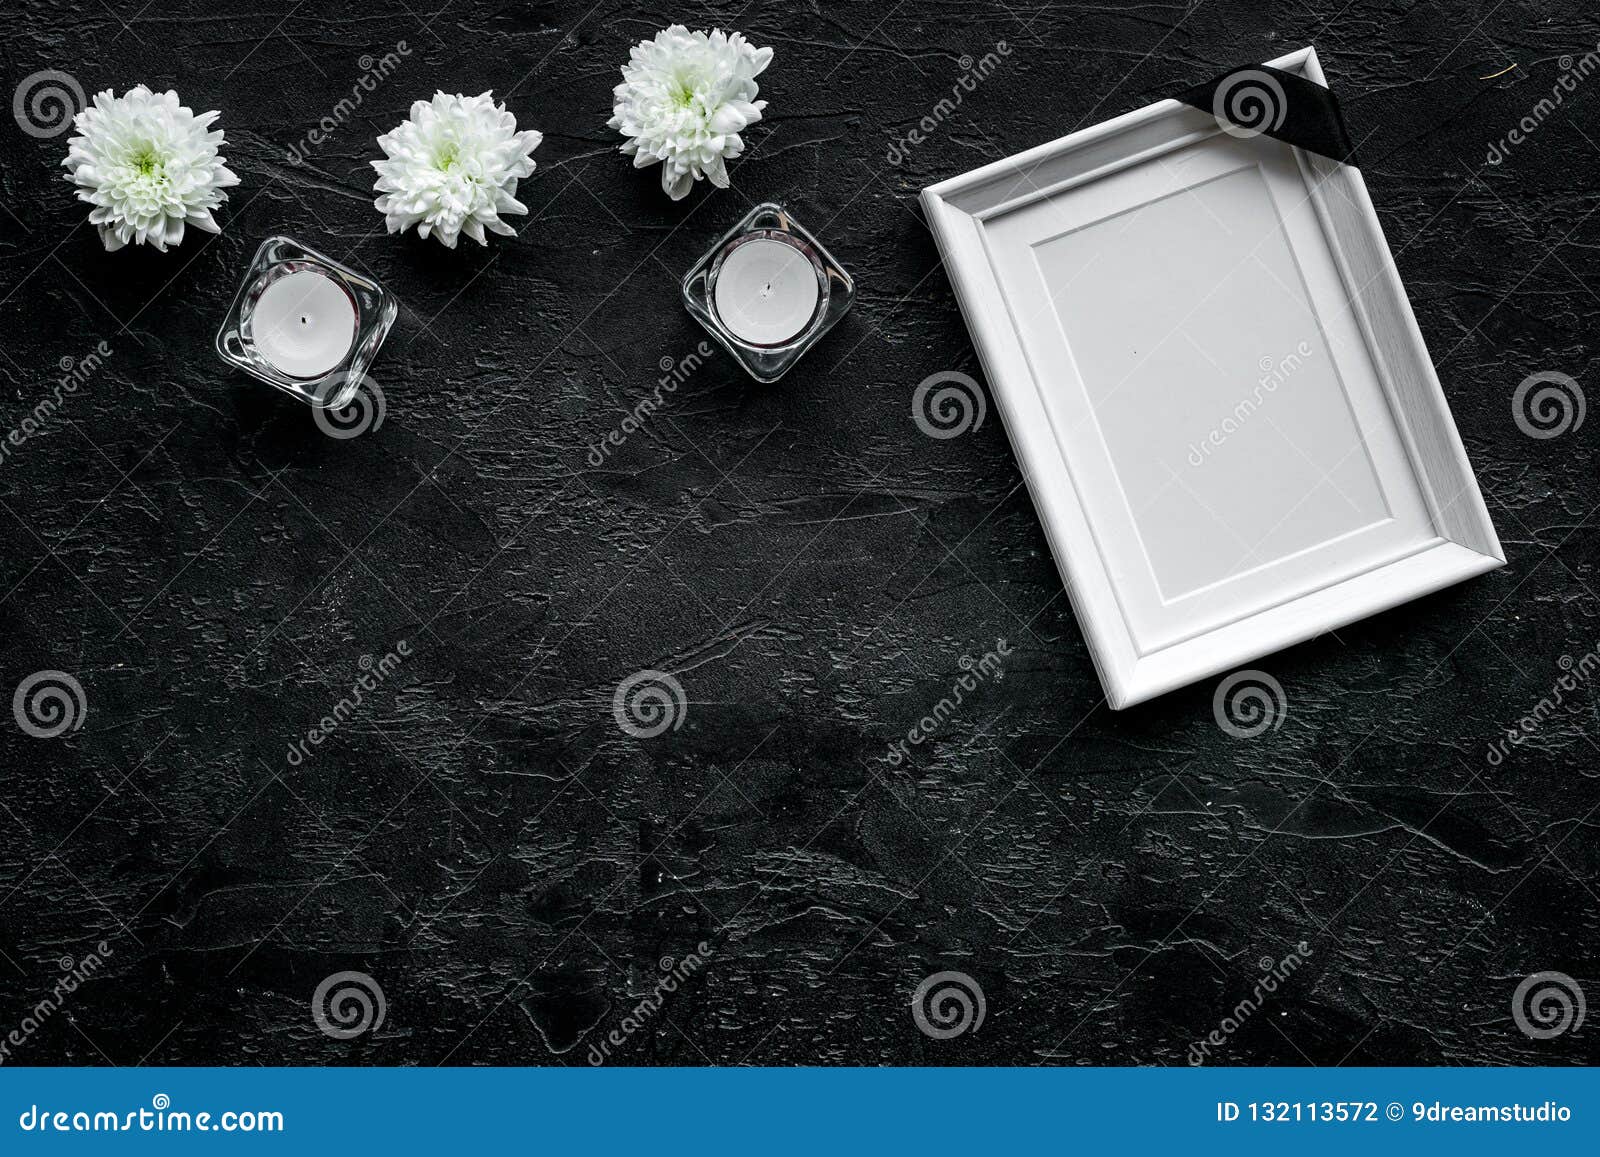 Death Concept. Photo Frame, Mockup with Black Ribbon Near Flowers, Candles  on Black Background Top View Copy Space Stock Photo - Image of ribbon,  mourning: 132113572